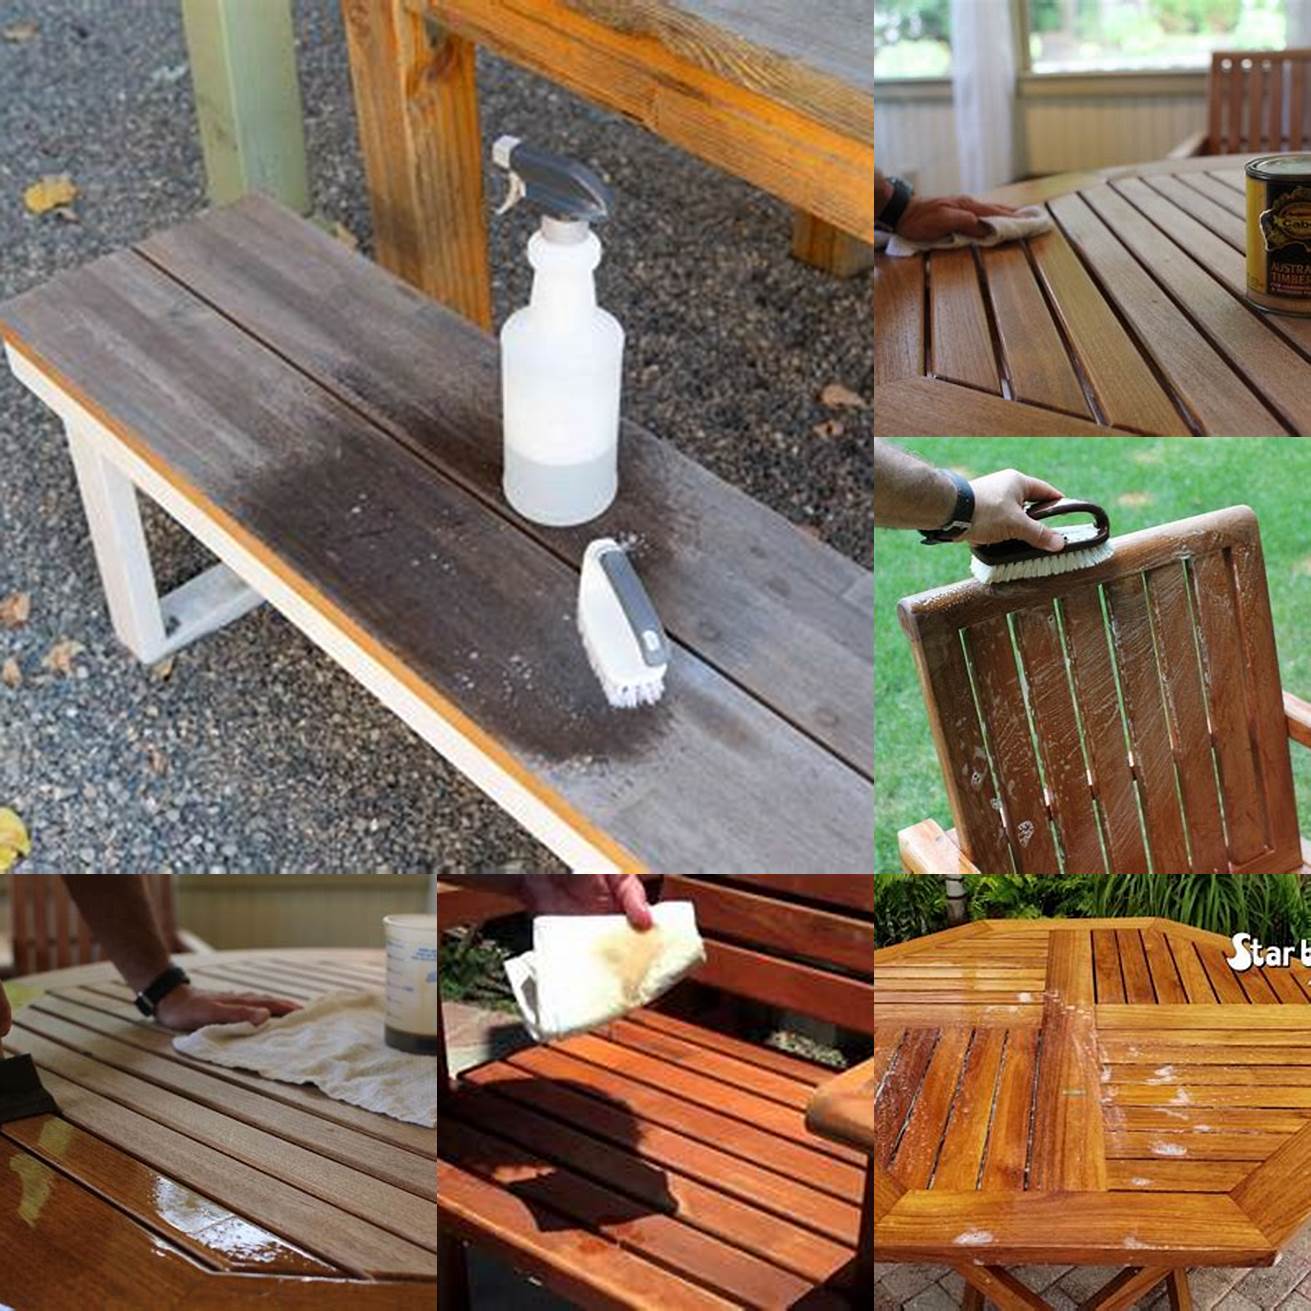 Using a Teak Cleaning Solution